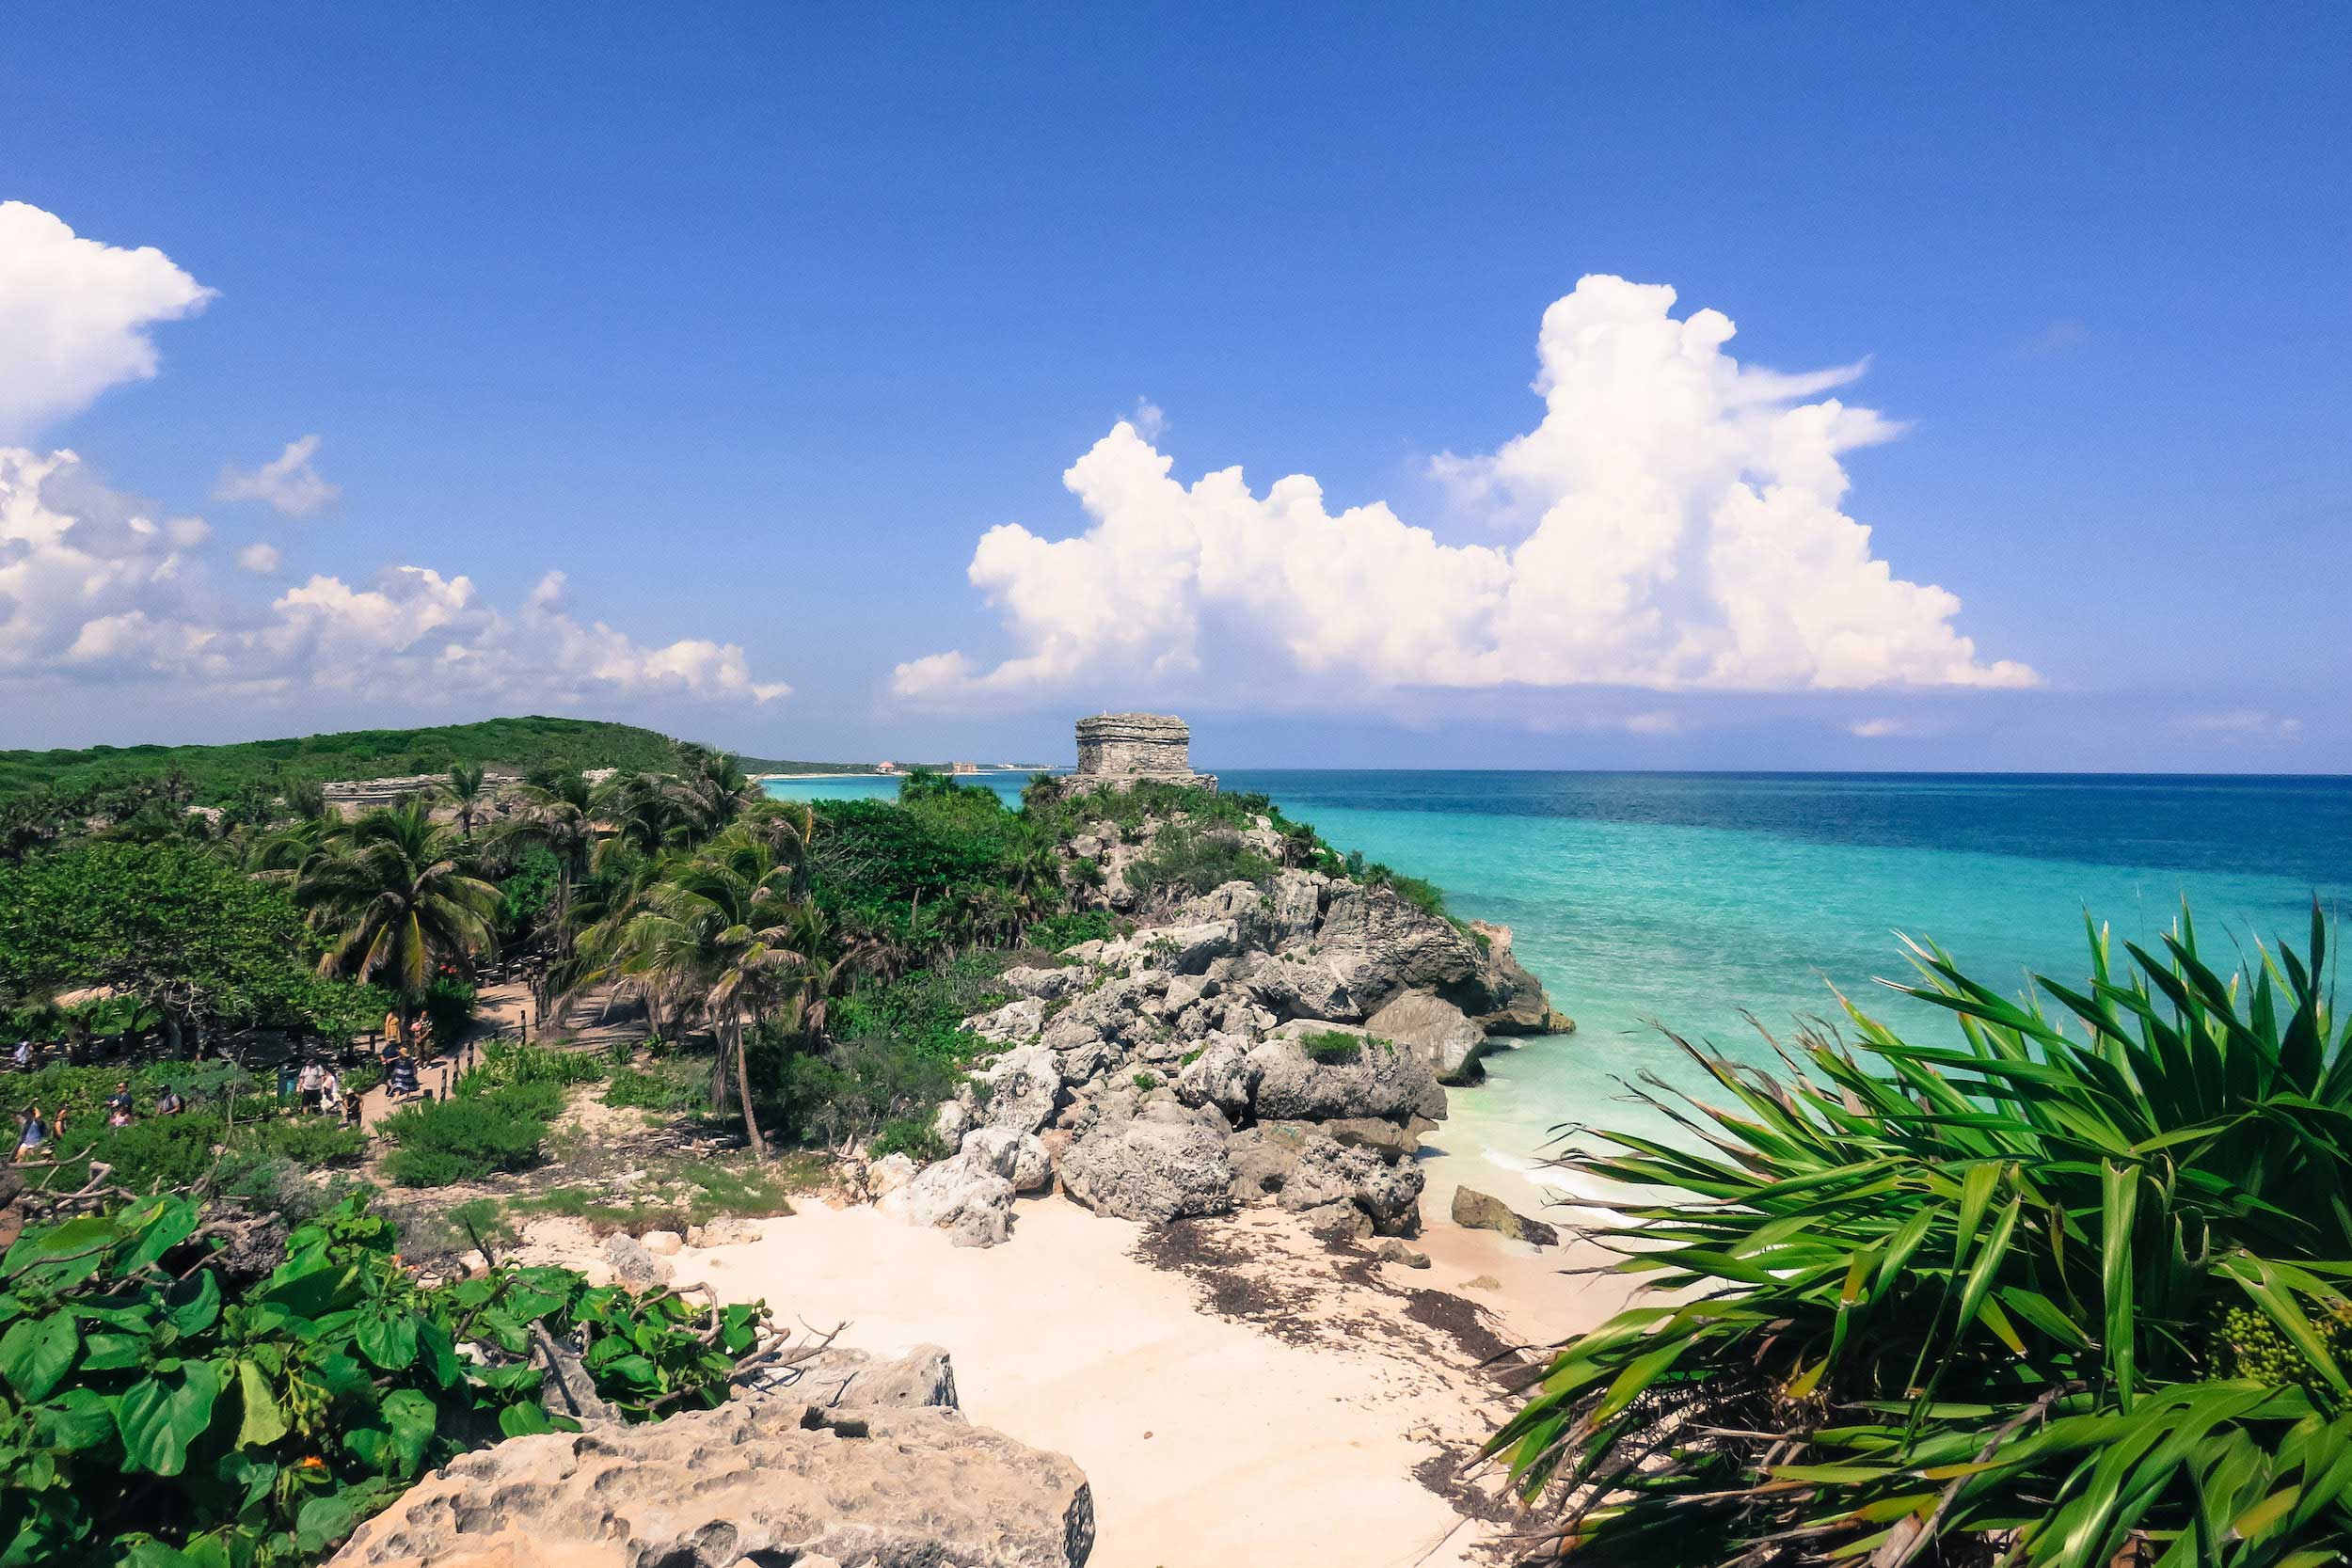 Playa Del Carmen, Mexico; How To Have The Best Holiday.